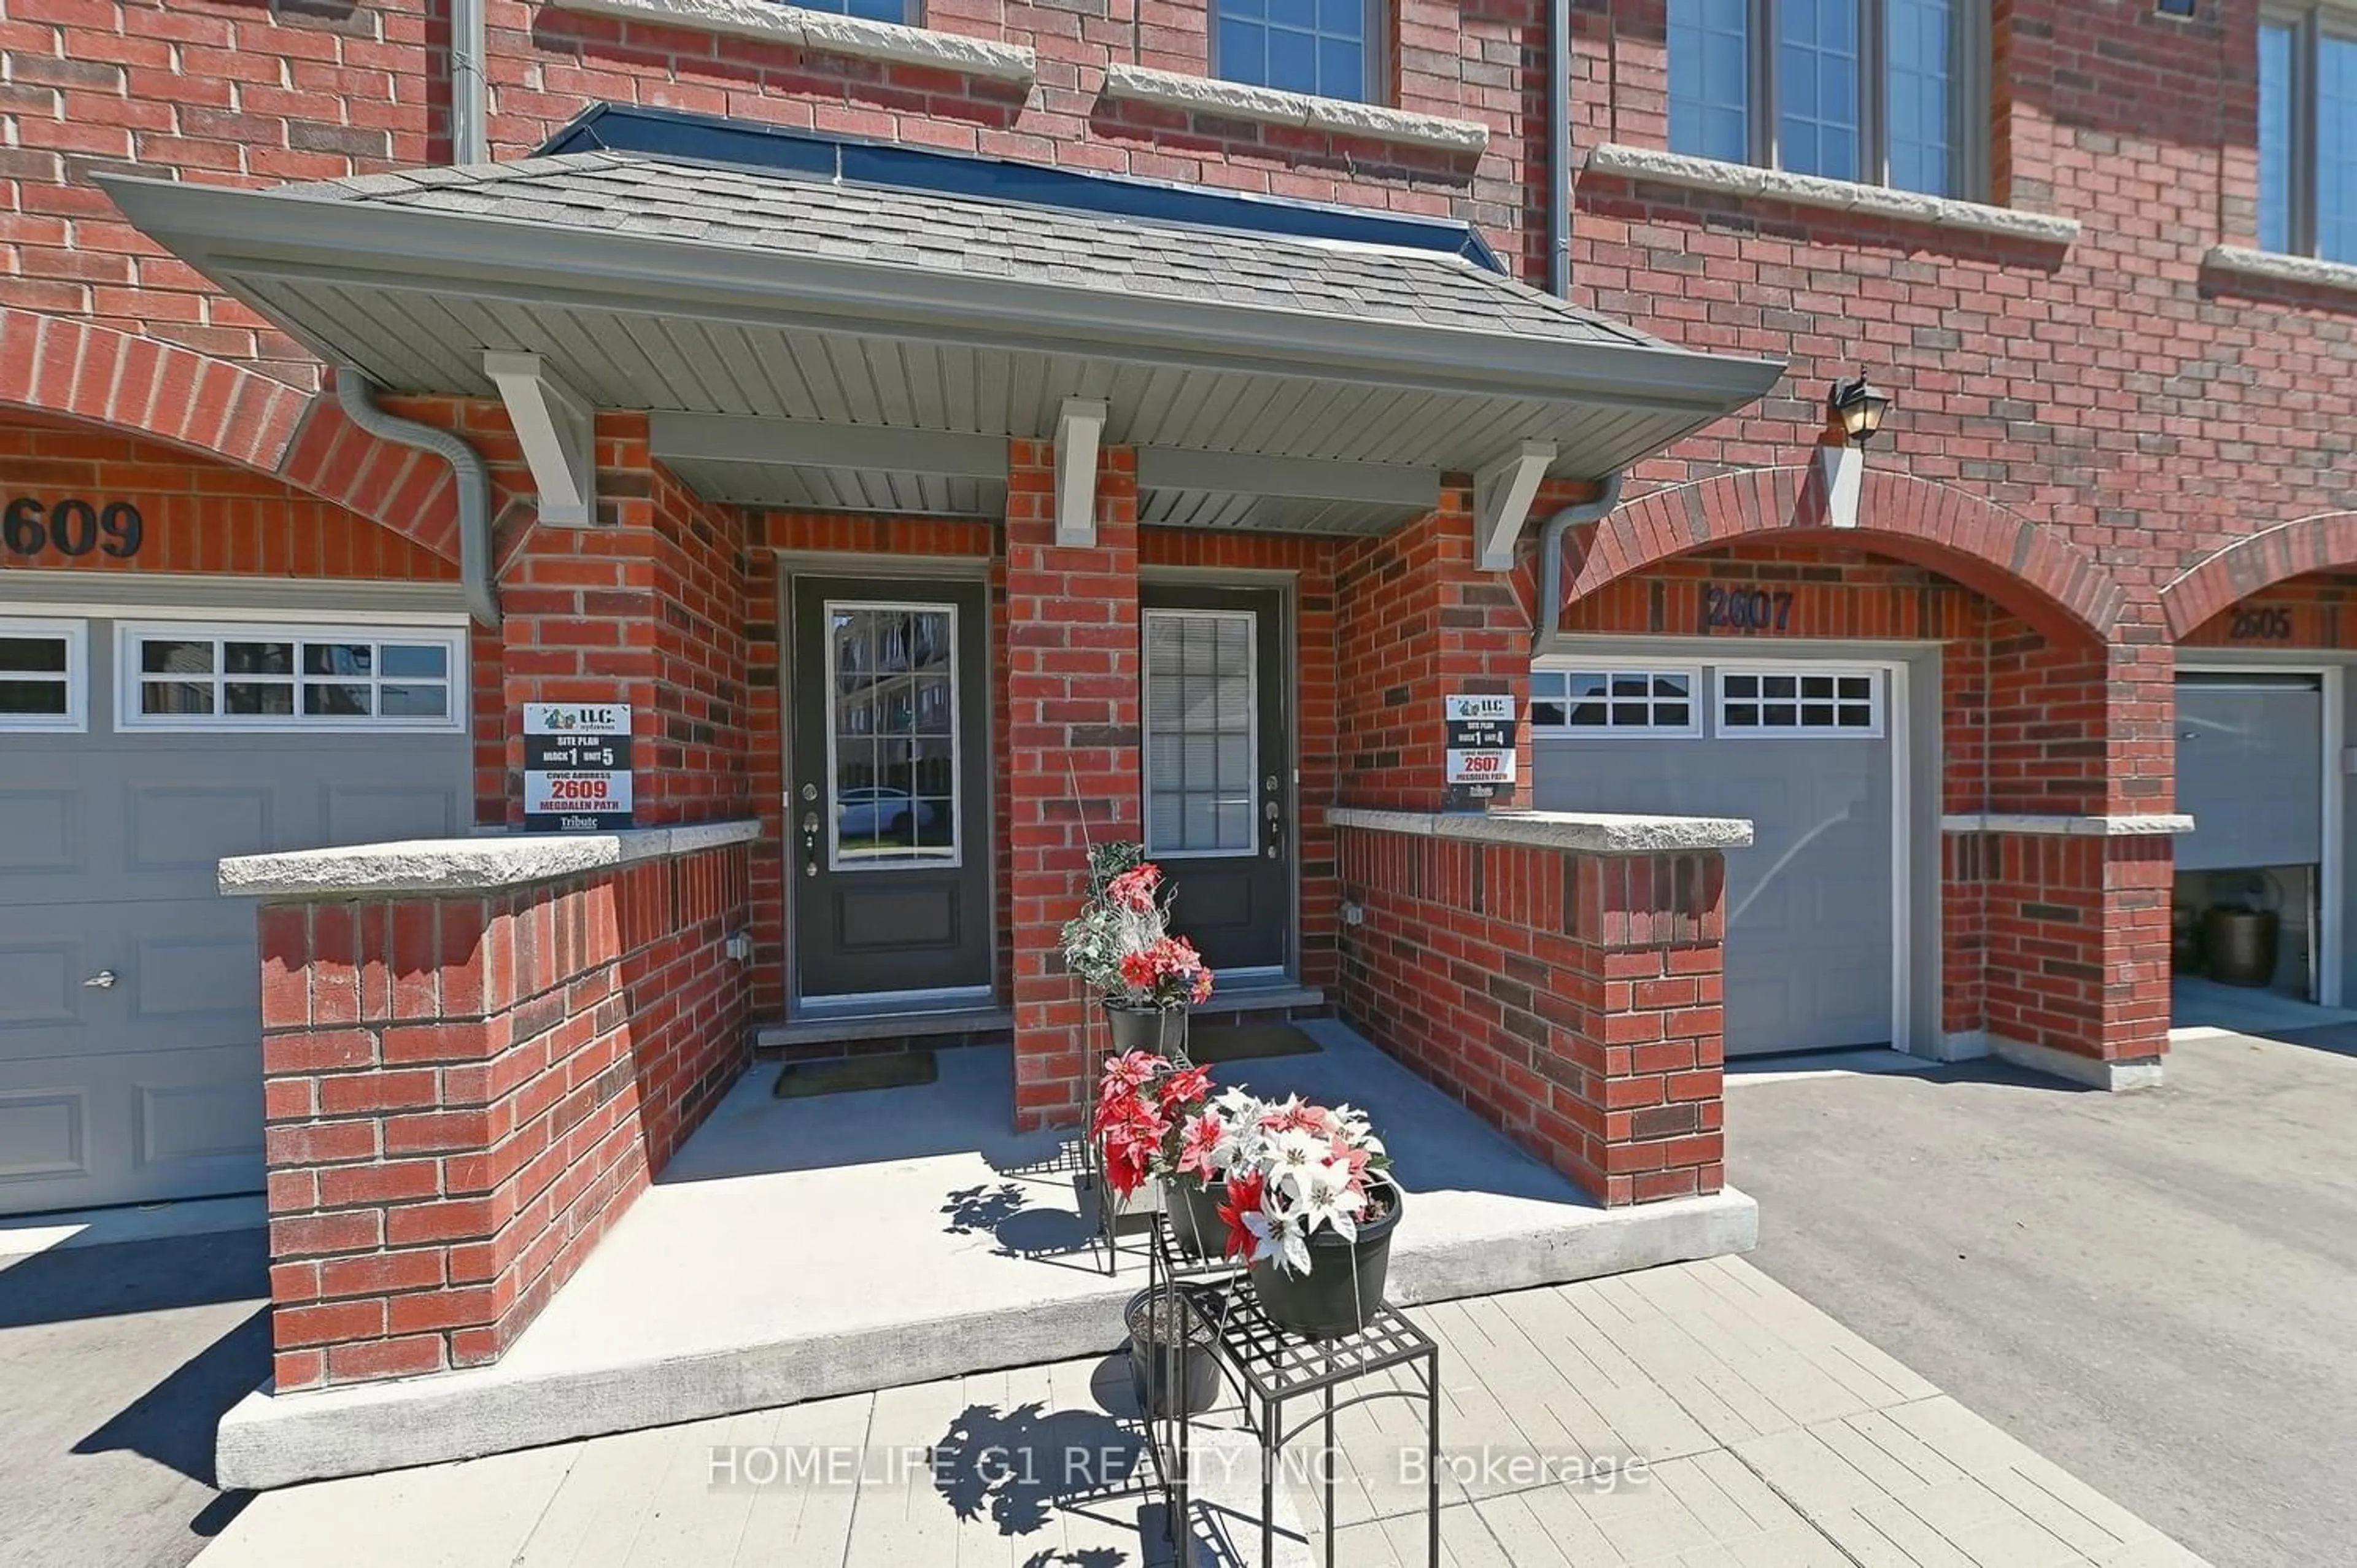 Home with brick exterior material for 2607 Magdalen Path #14, Oshawa Ontario L1L 0R6